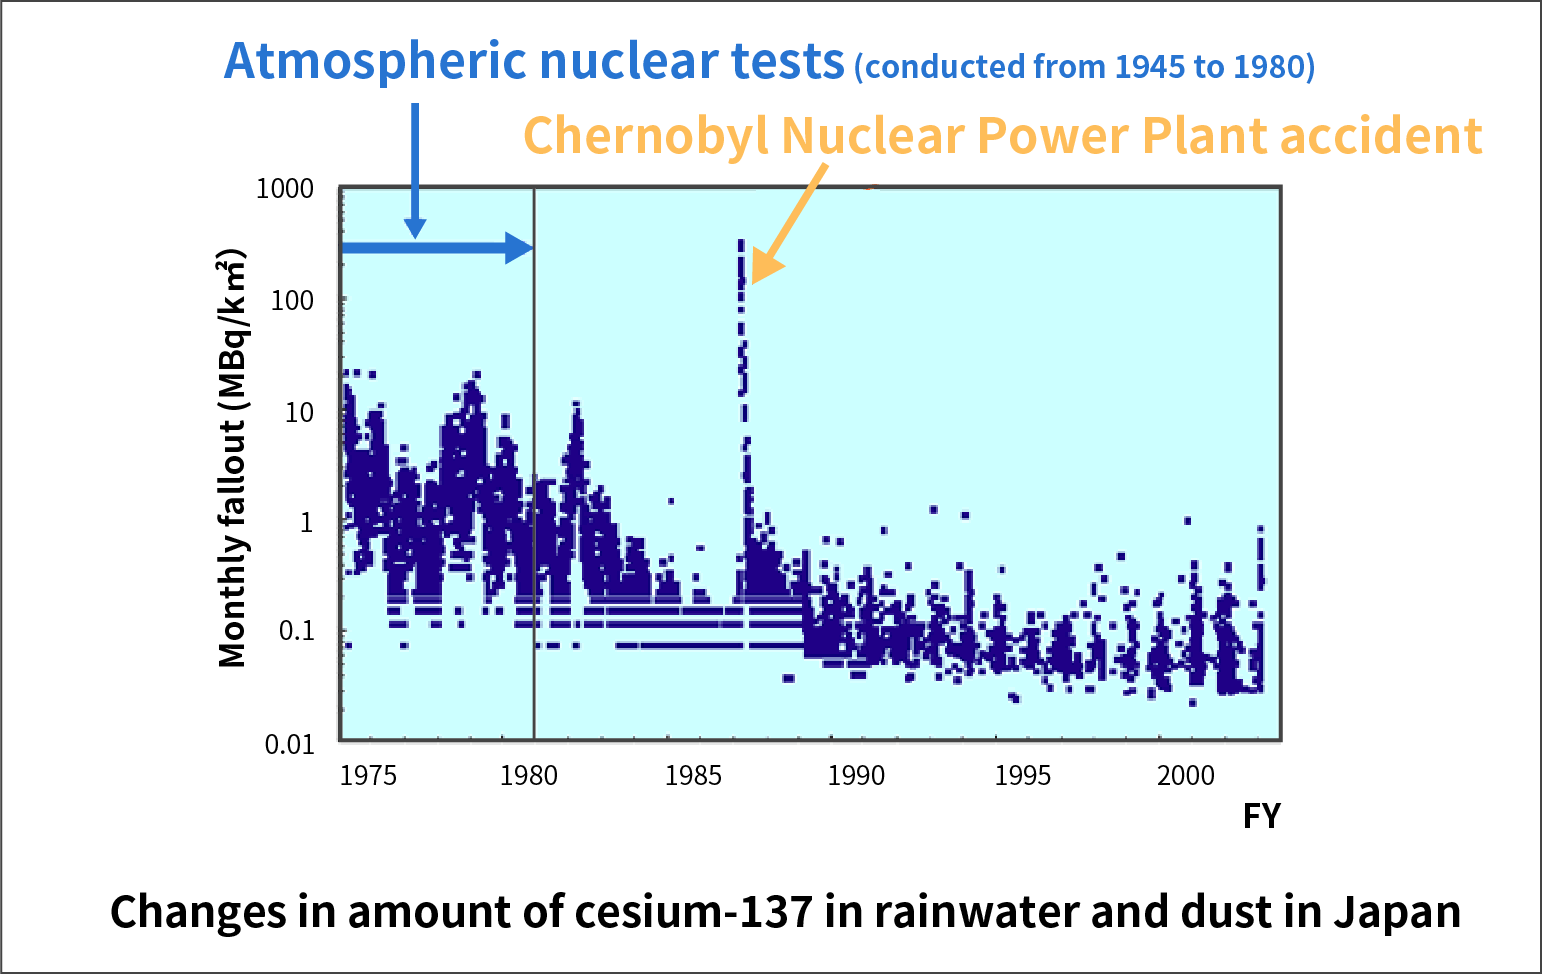 Changes in amount of cesium-137 in rainwater and dust in Japan